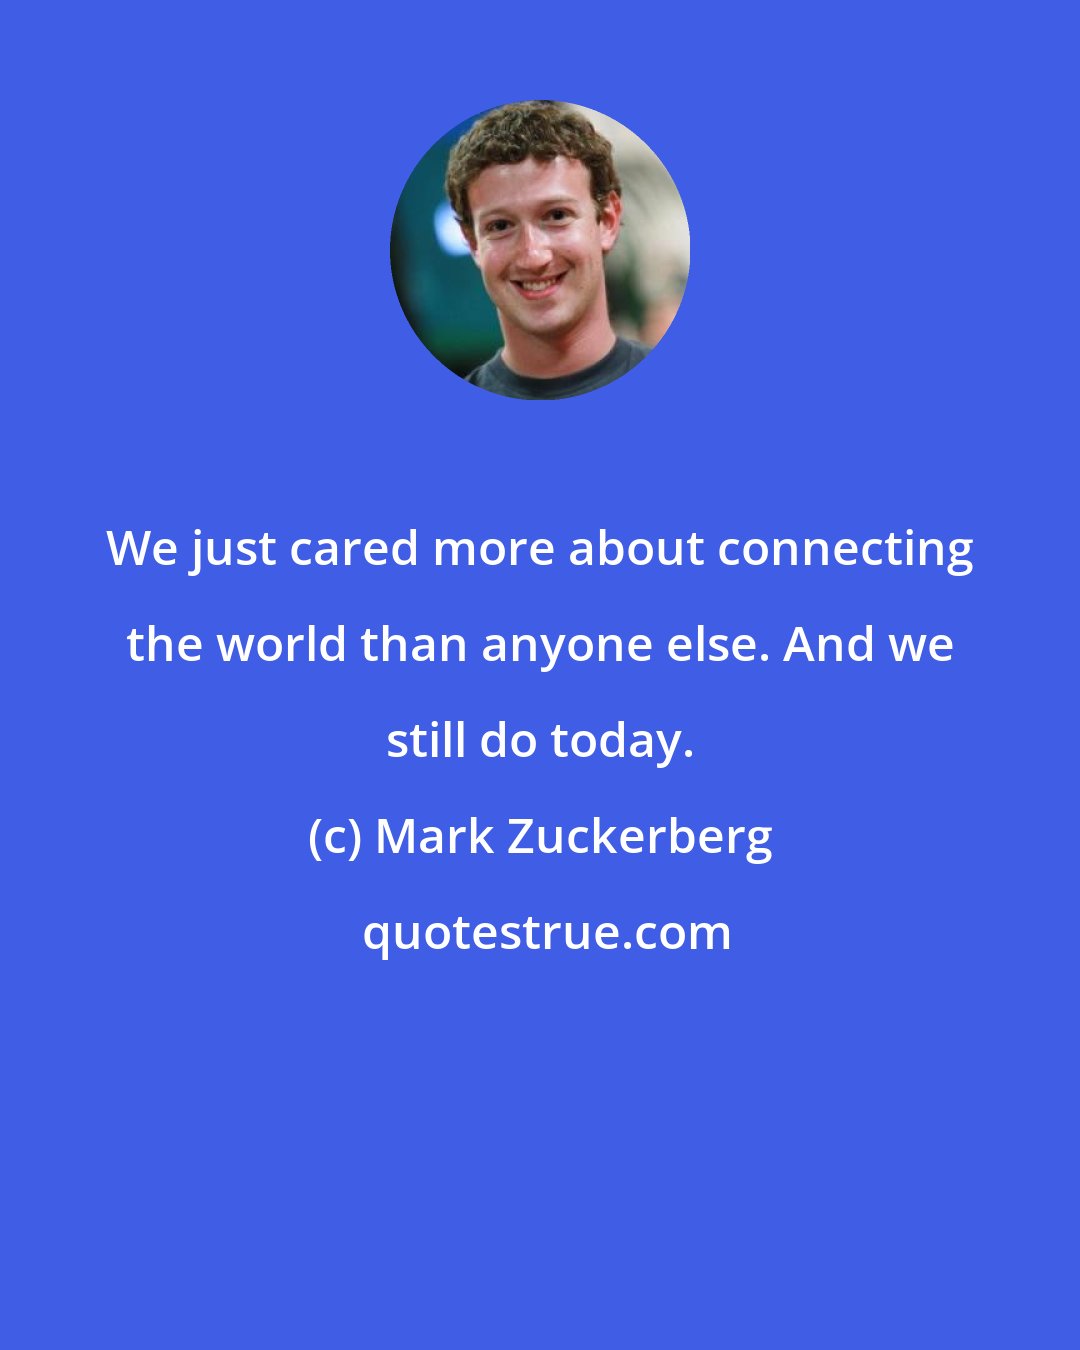 Mark Zuckerberg: We just cared more about connecting the world than anyone else. And we still do today.